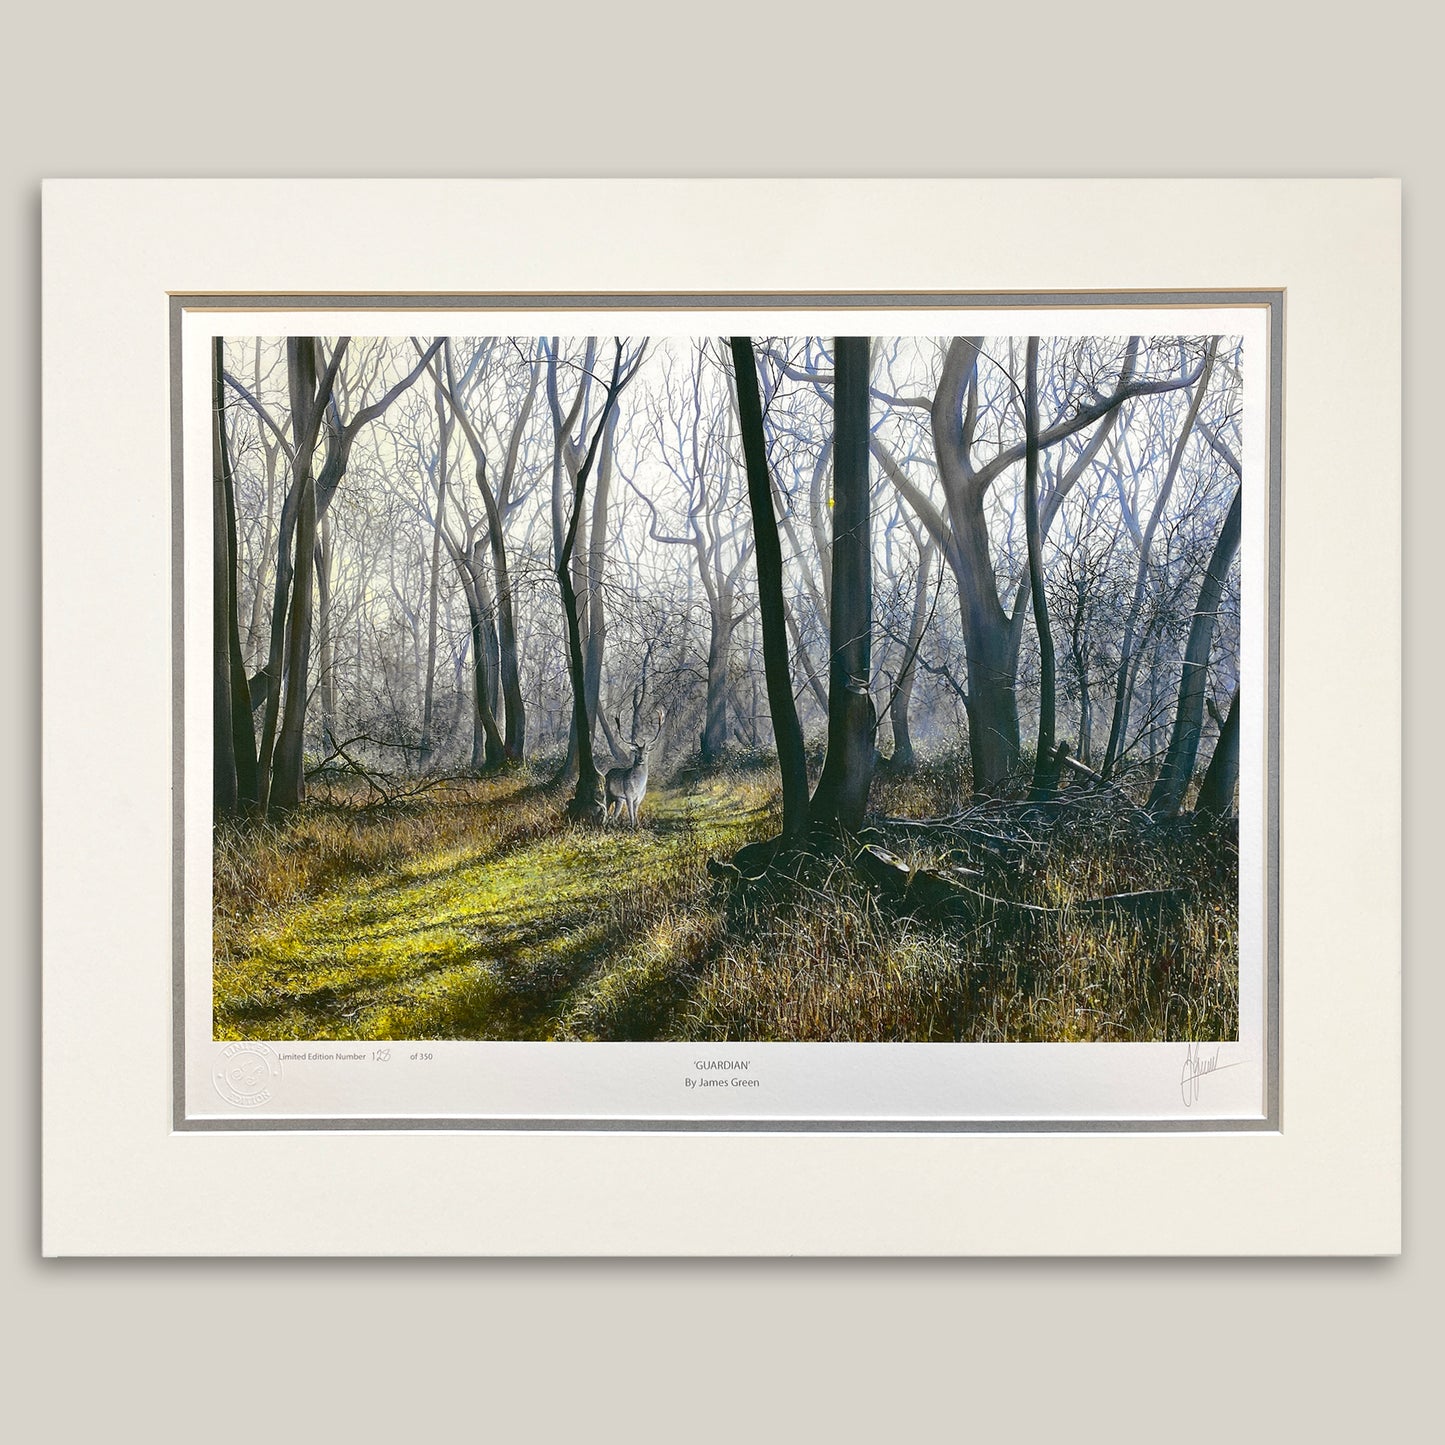 painting of a fallow stag in a forest